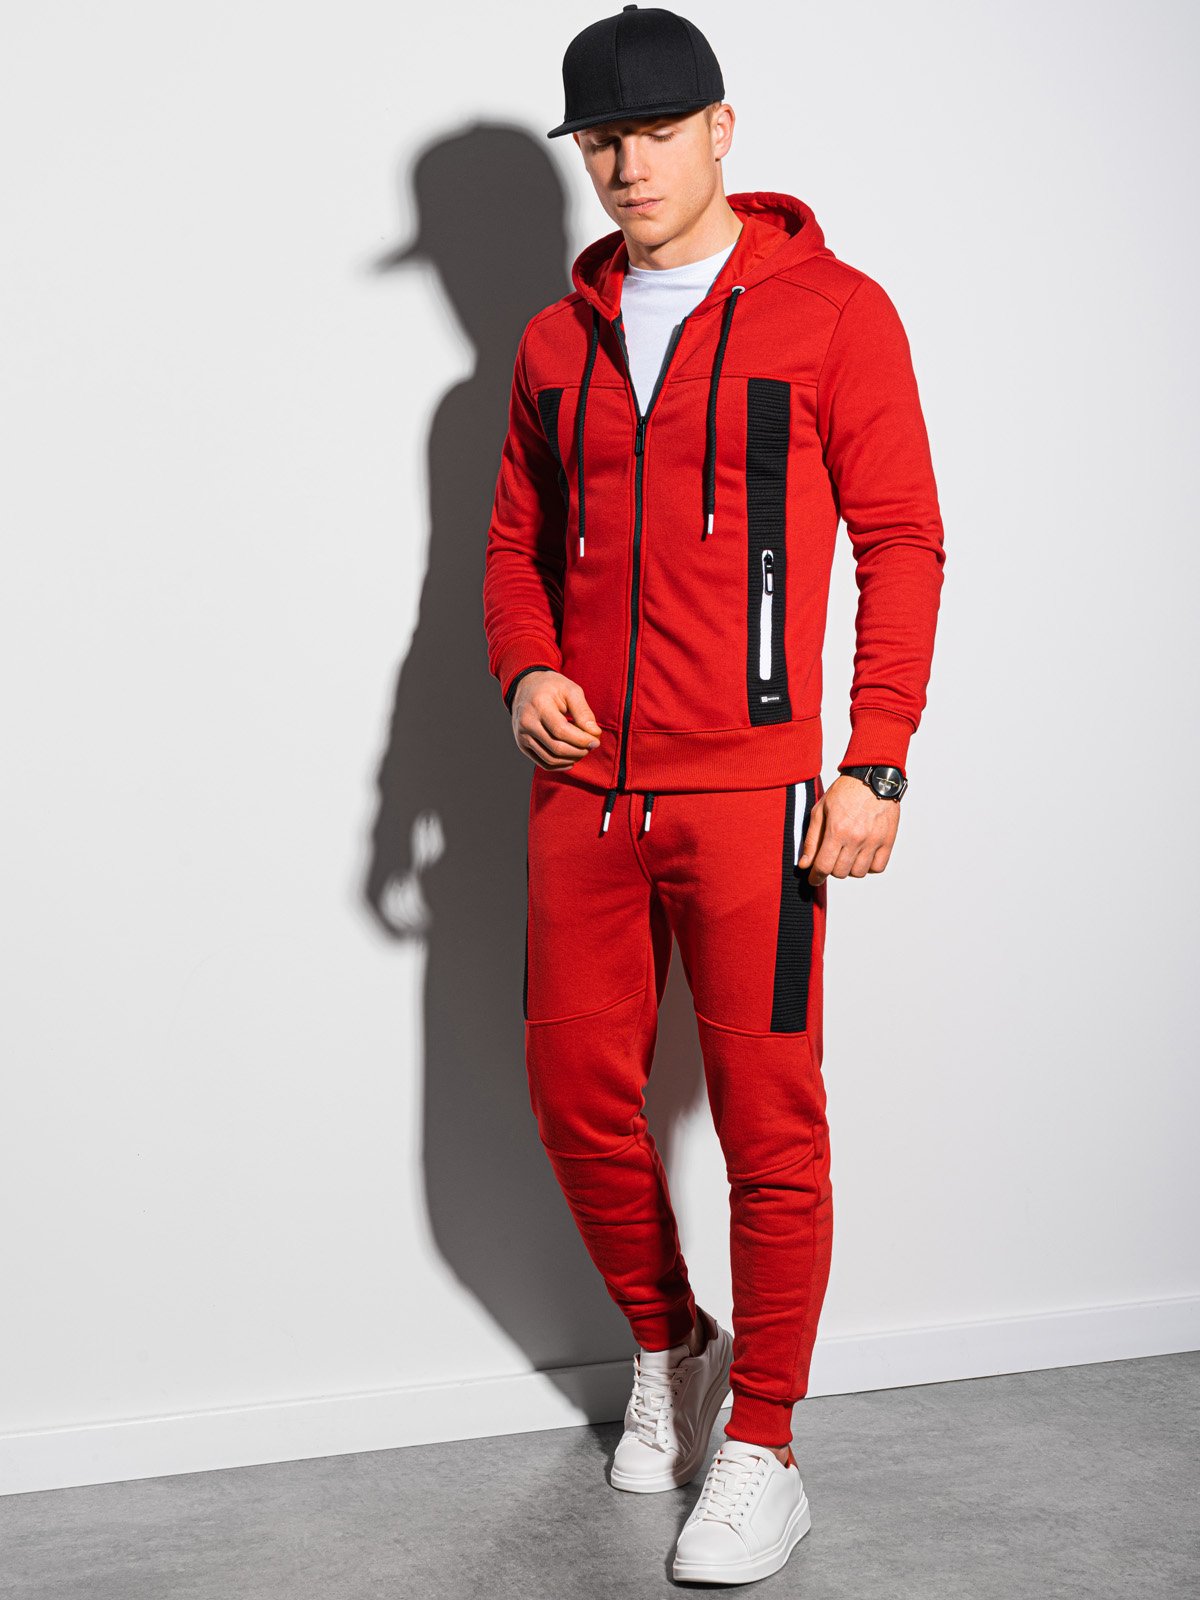 Red Pants  Red pants men, Red pants outfit, Mens outfits